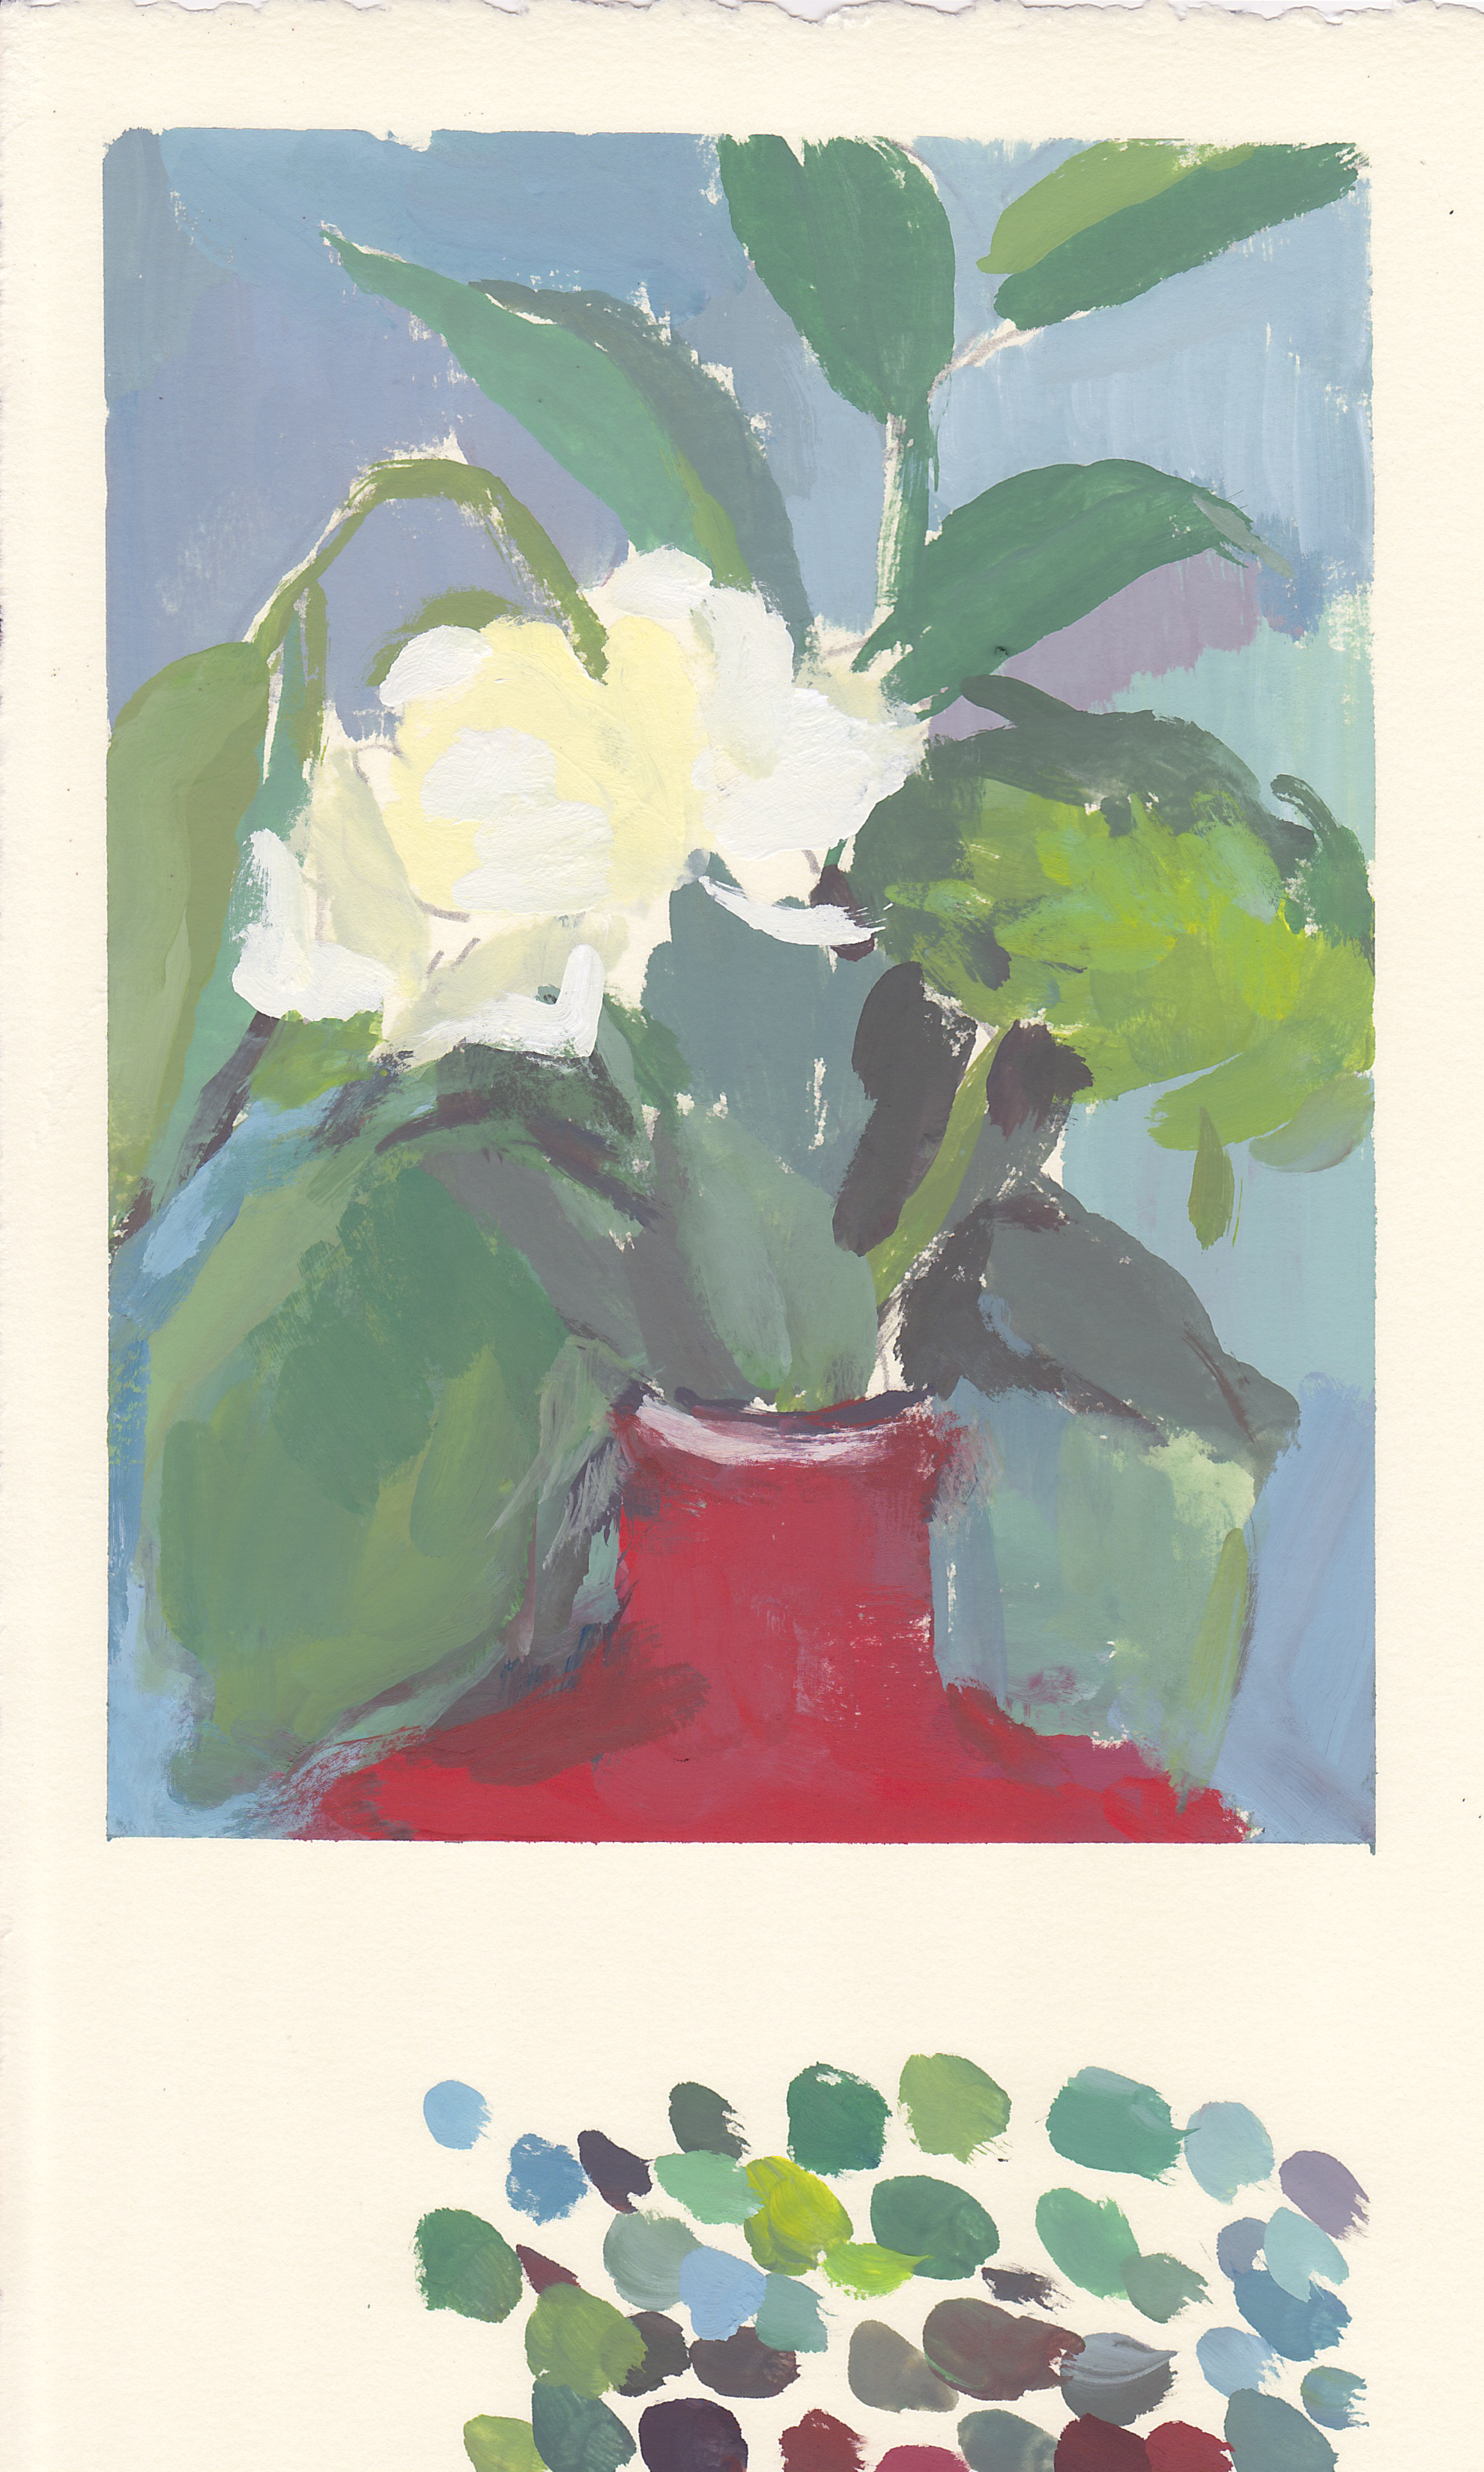    white flowers, red vase     gouache on paper 7.5 x 5.75" 2017   purchase  